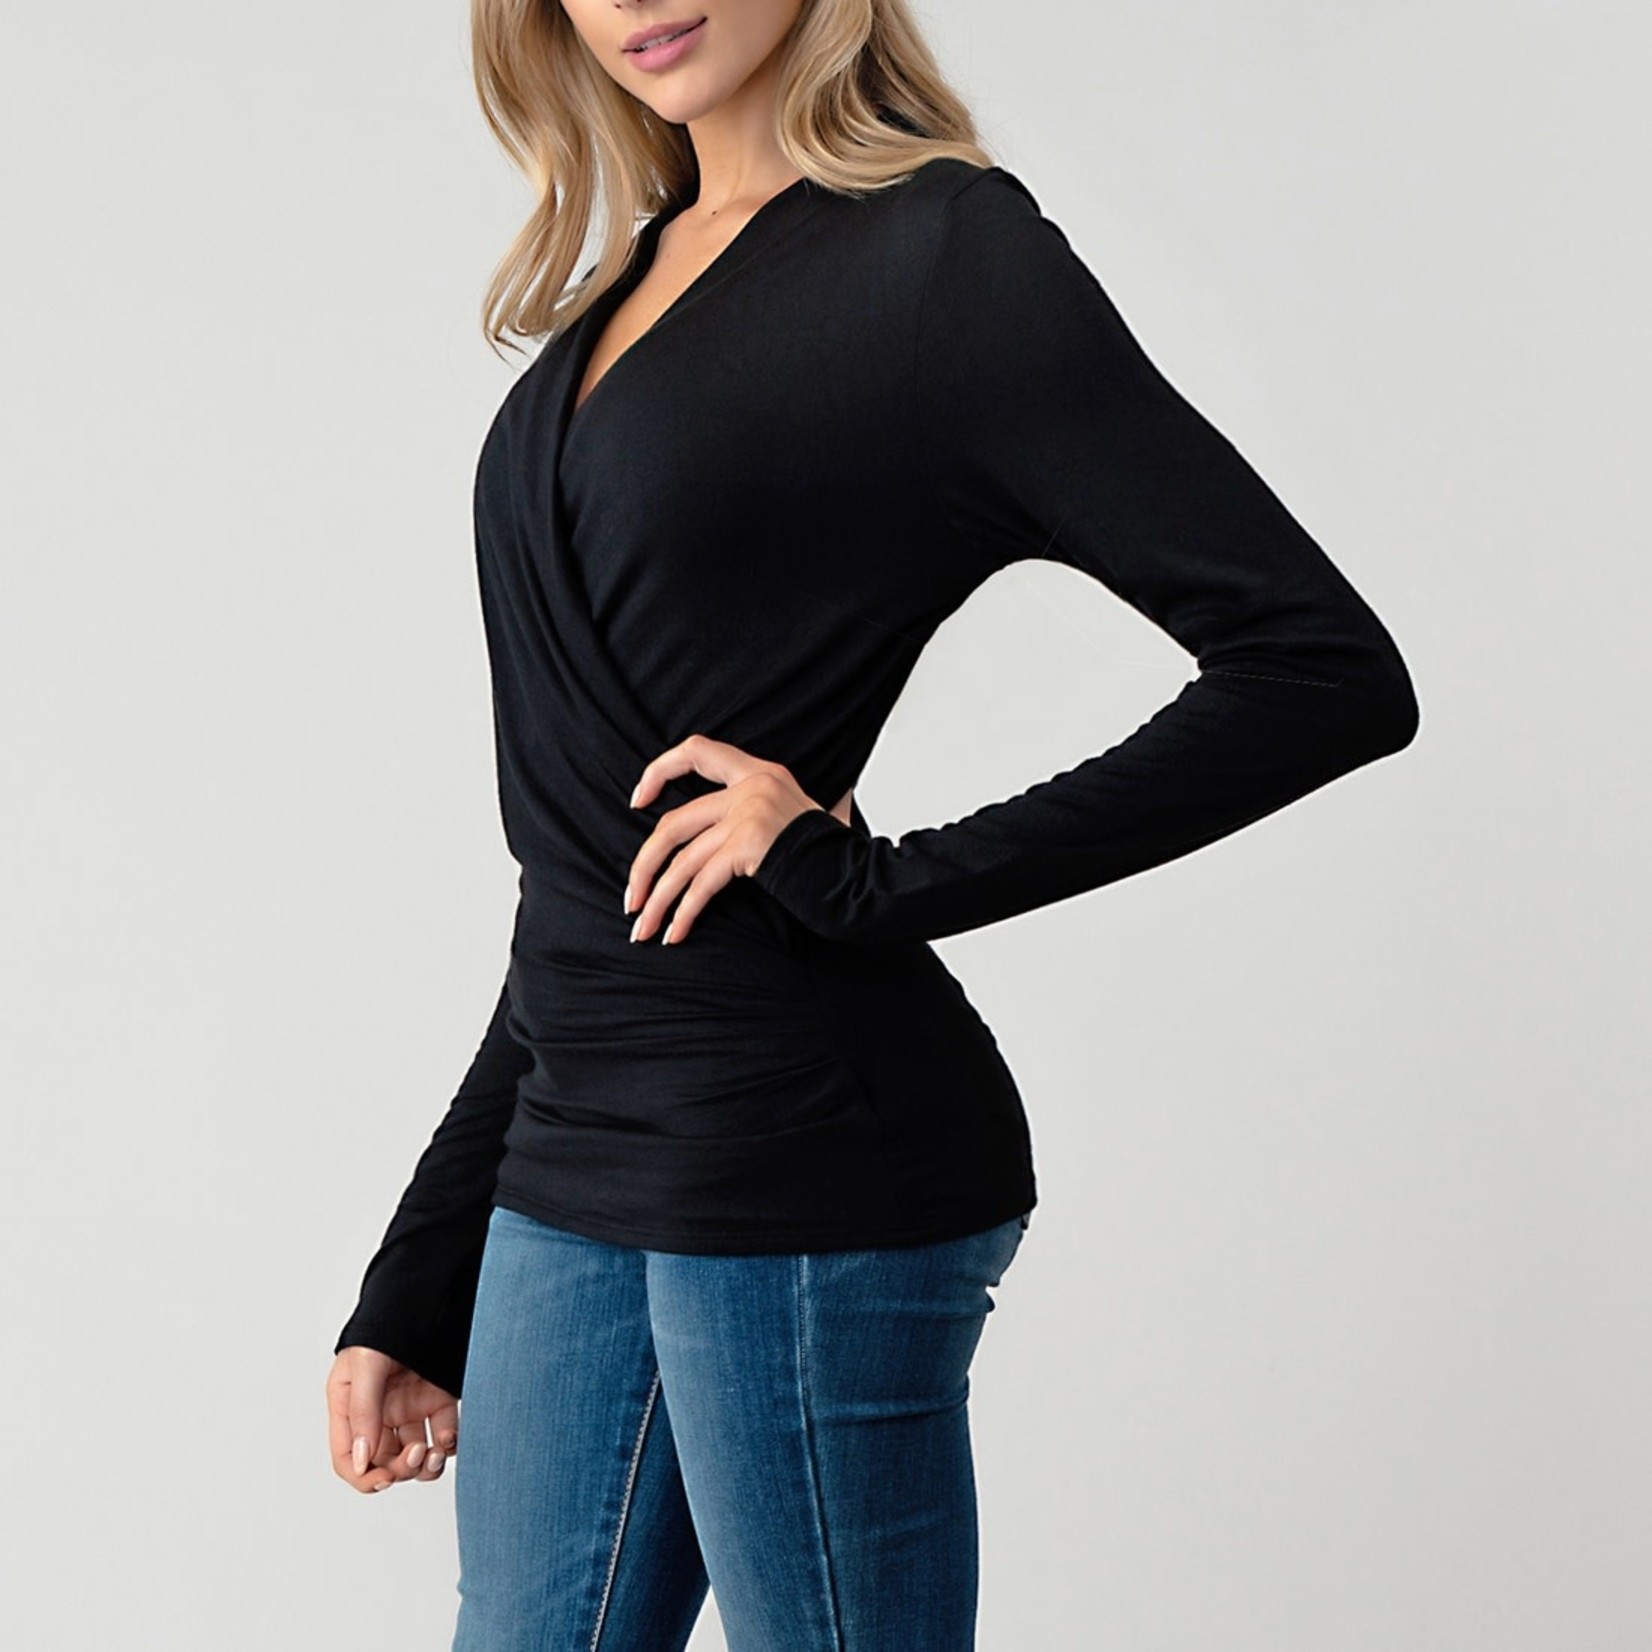 Heimious Ruched Sleeve Surplice Top